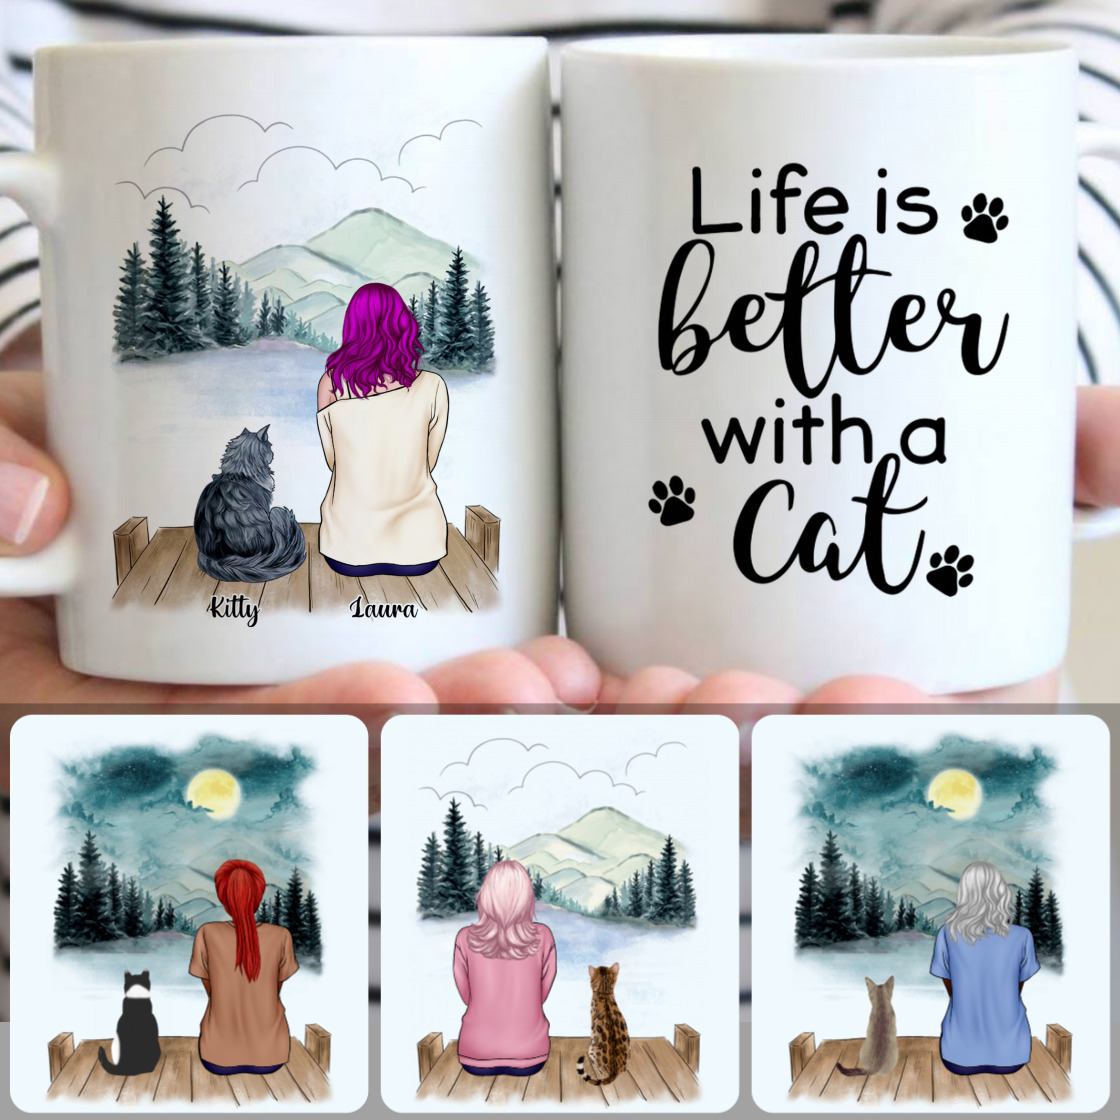 Personalized Mug, Meaningful Gifts For Her Wife Girlfriend, Girl & Cat Customized Coffee Mug With Names